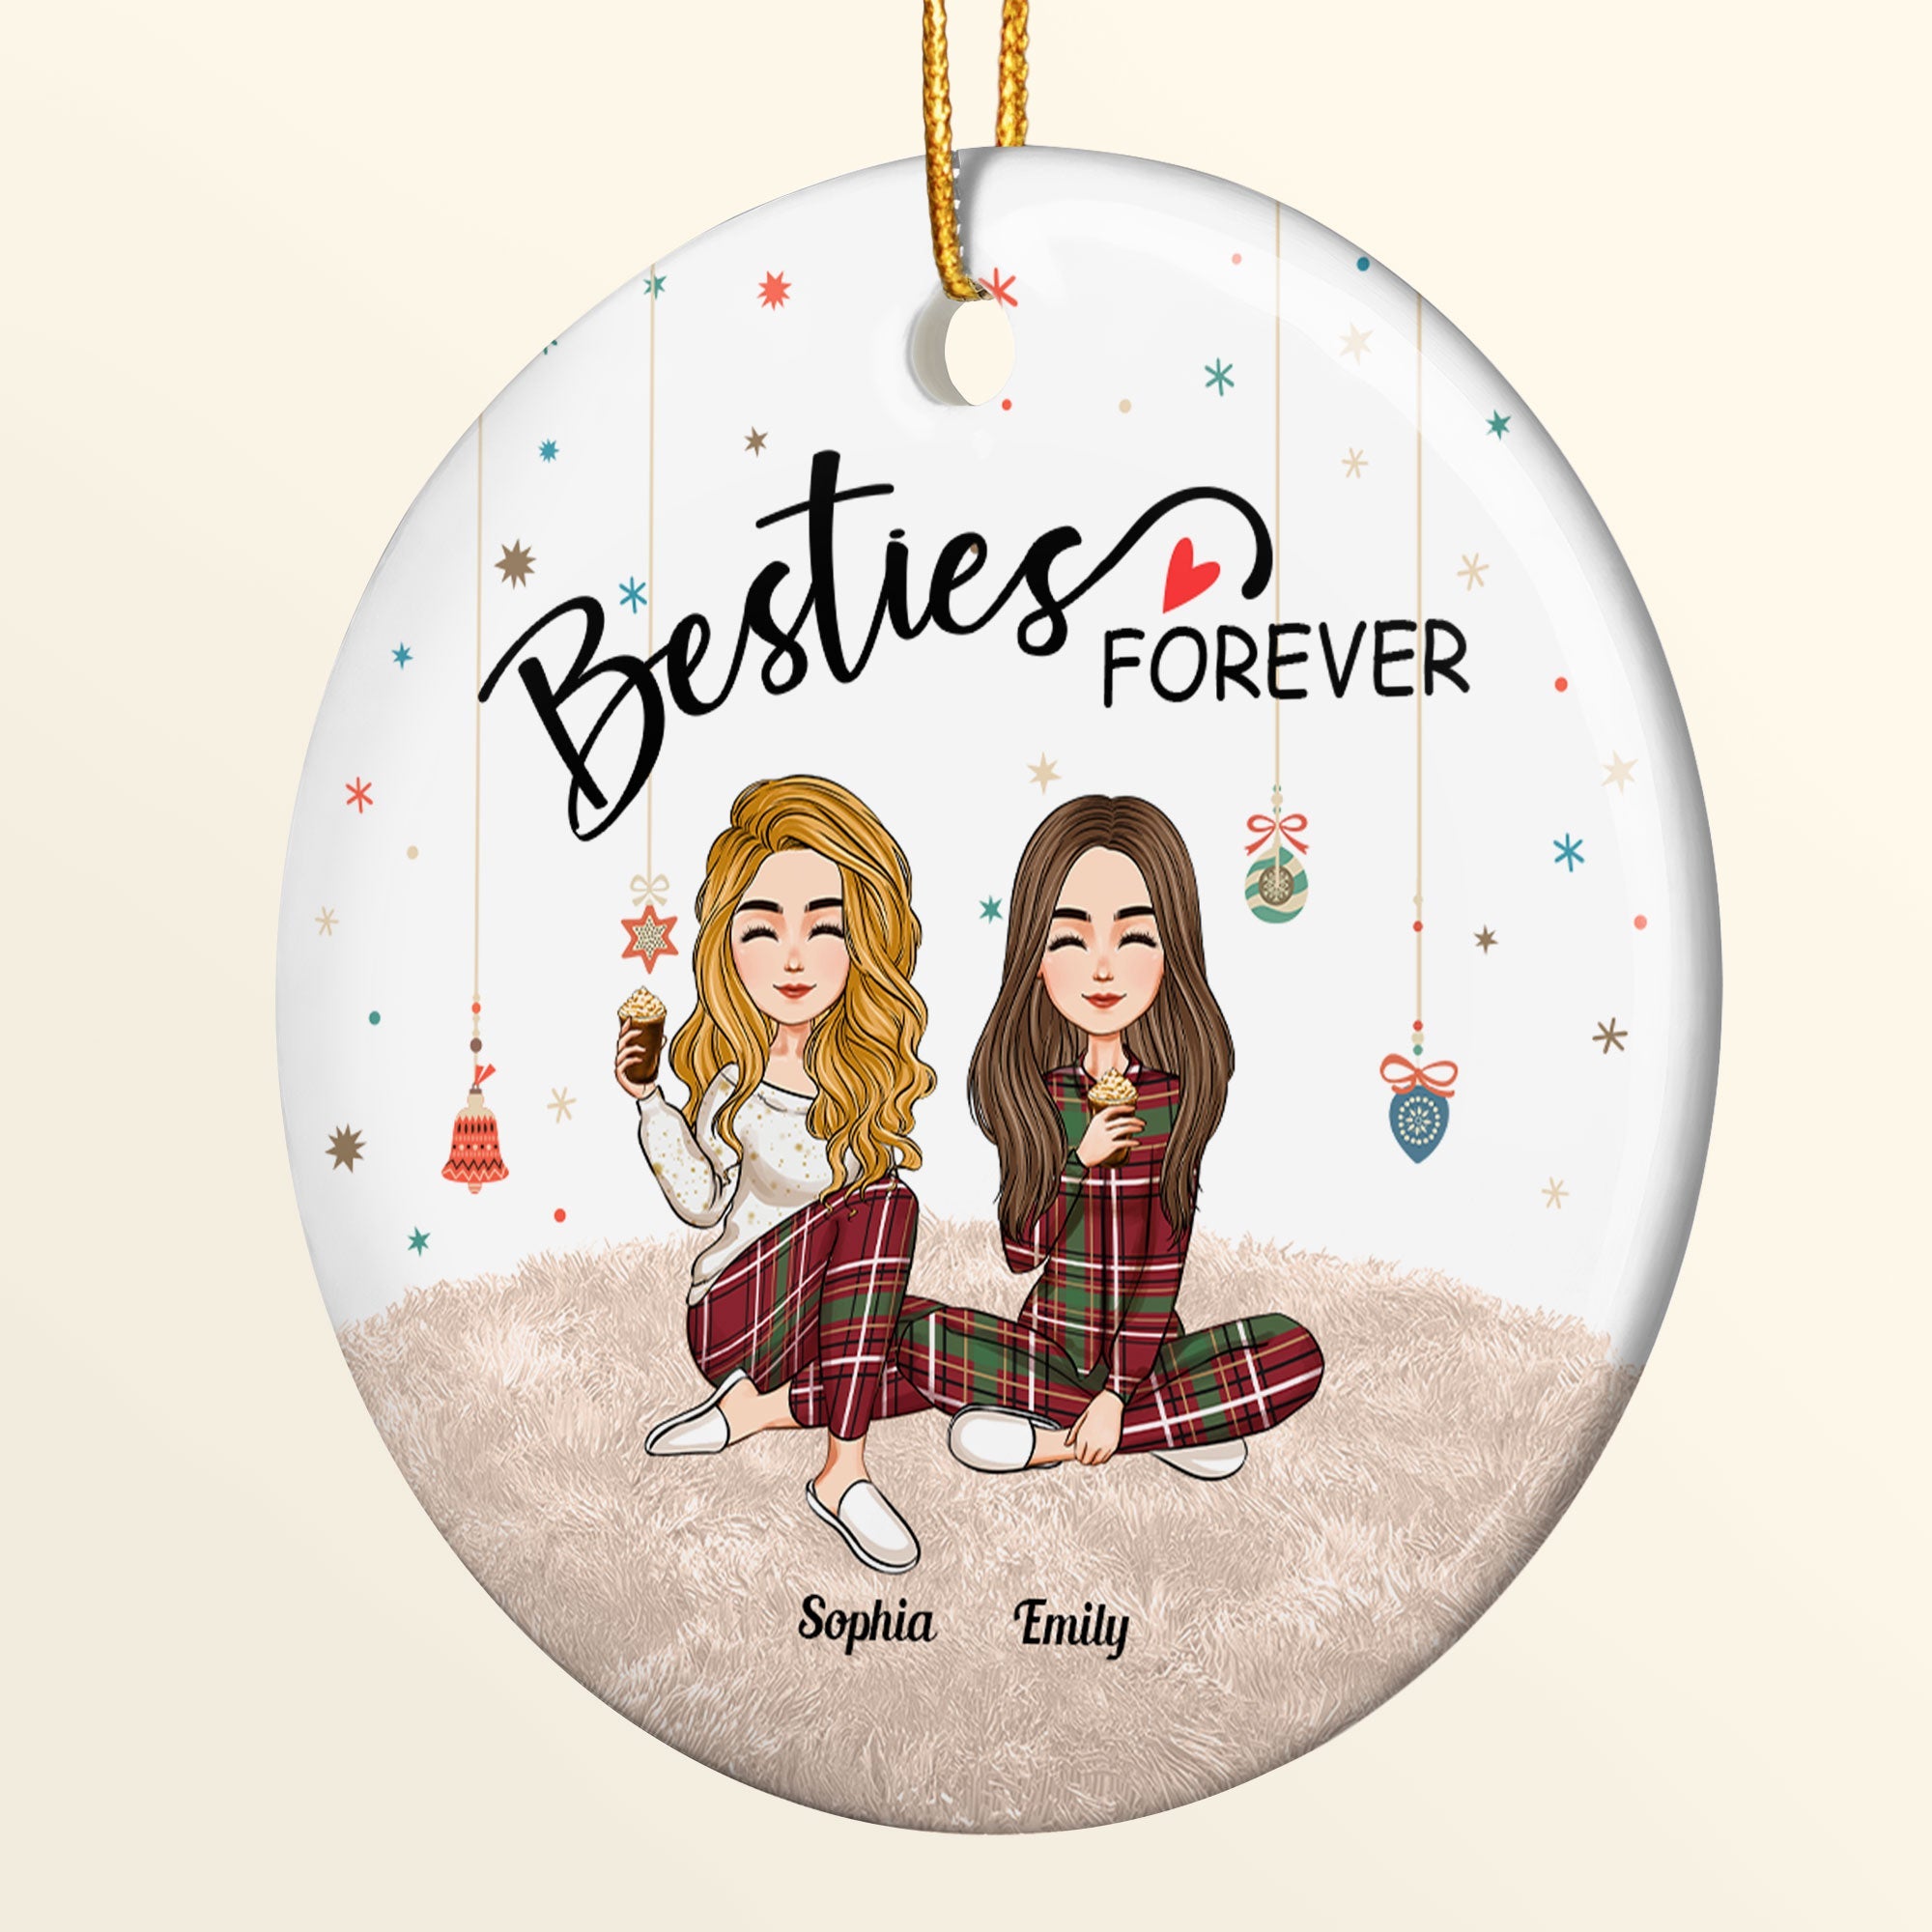 Besties Forever - Personalized Ceramic Ornament - Christmas, New Year Gift For Sistas, Sister, Besties, Best Friends, Soul Sisters